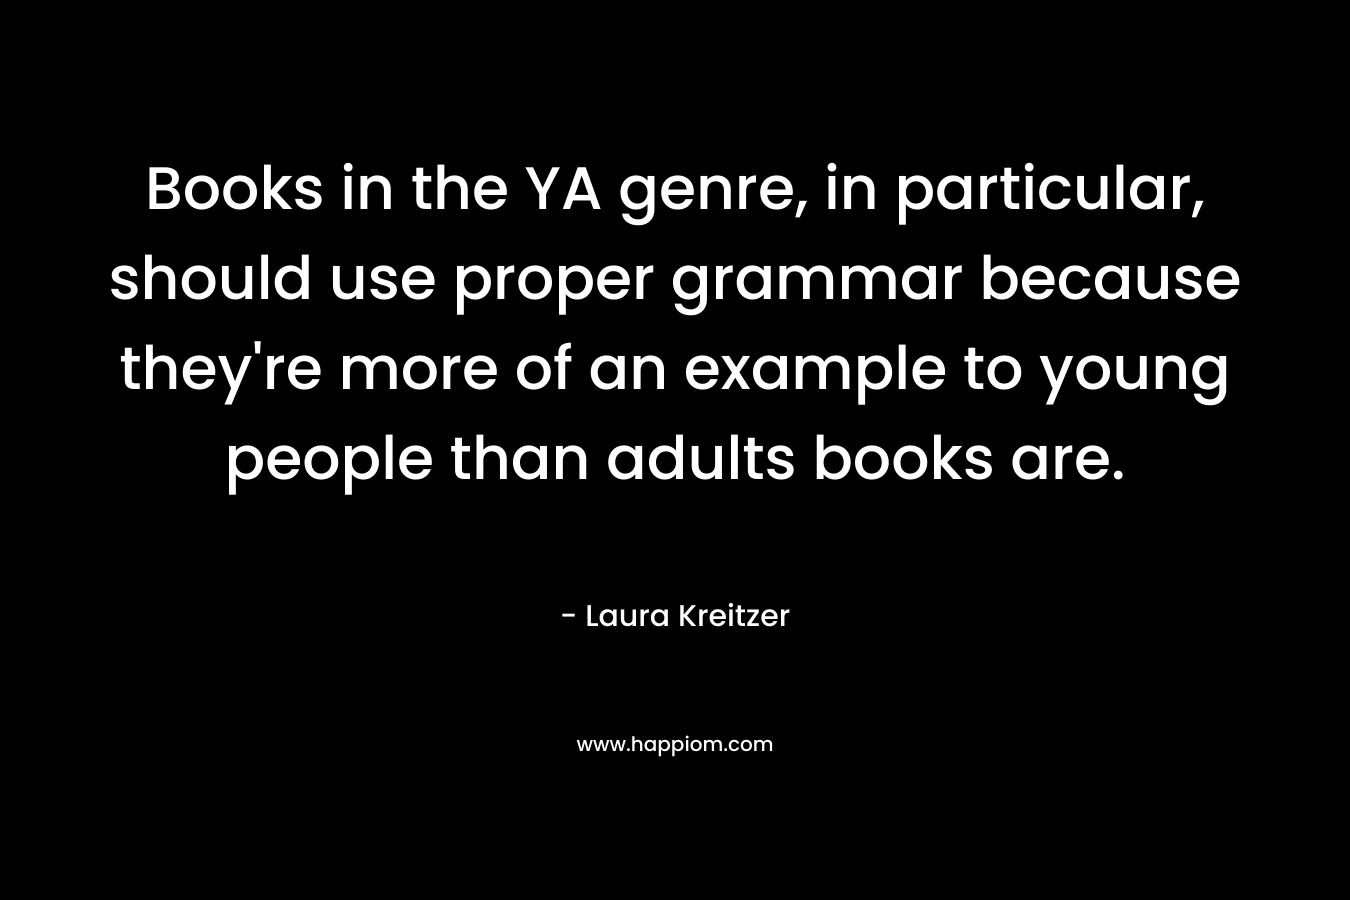 Books in the YA genre, in particular, should use proper grammar because they're more of an example to young people than adults books are.